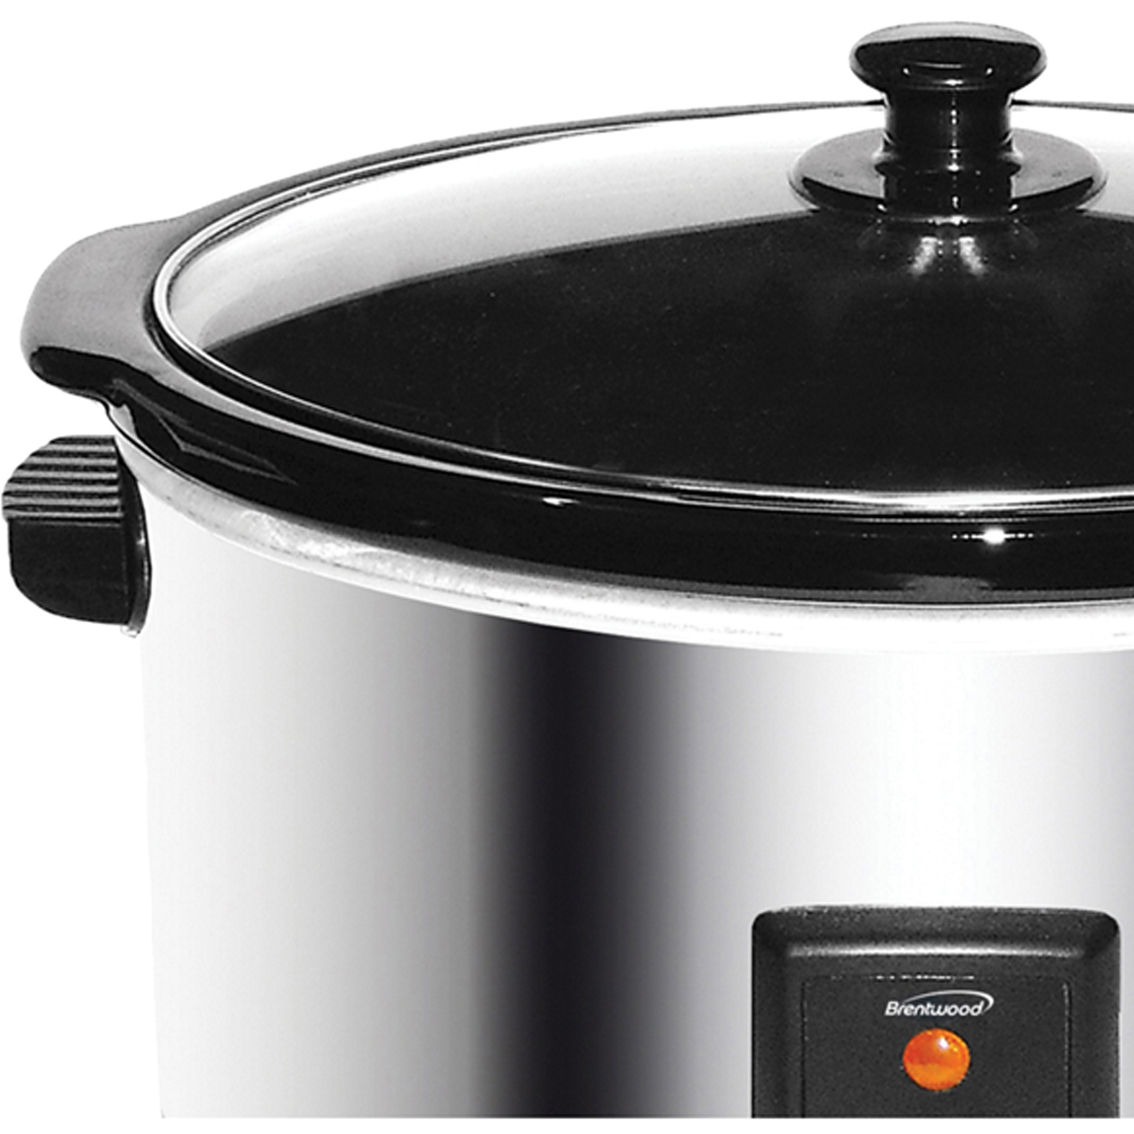 Brentwood 360W Stainless Steel 8 qt. Slow Cooker - Image 5 of 9